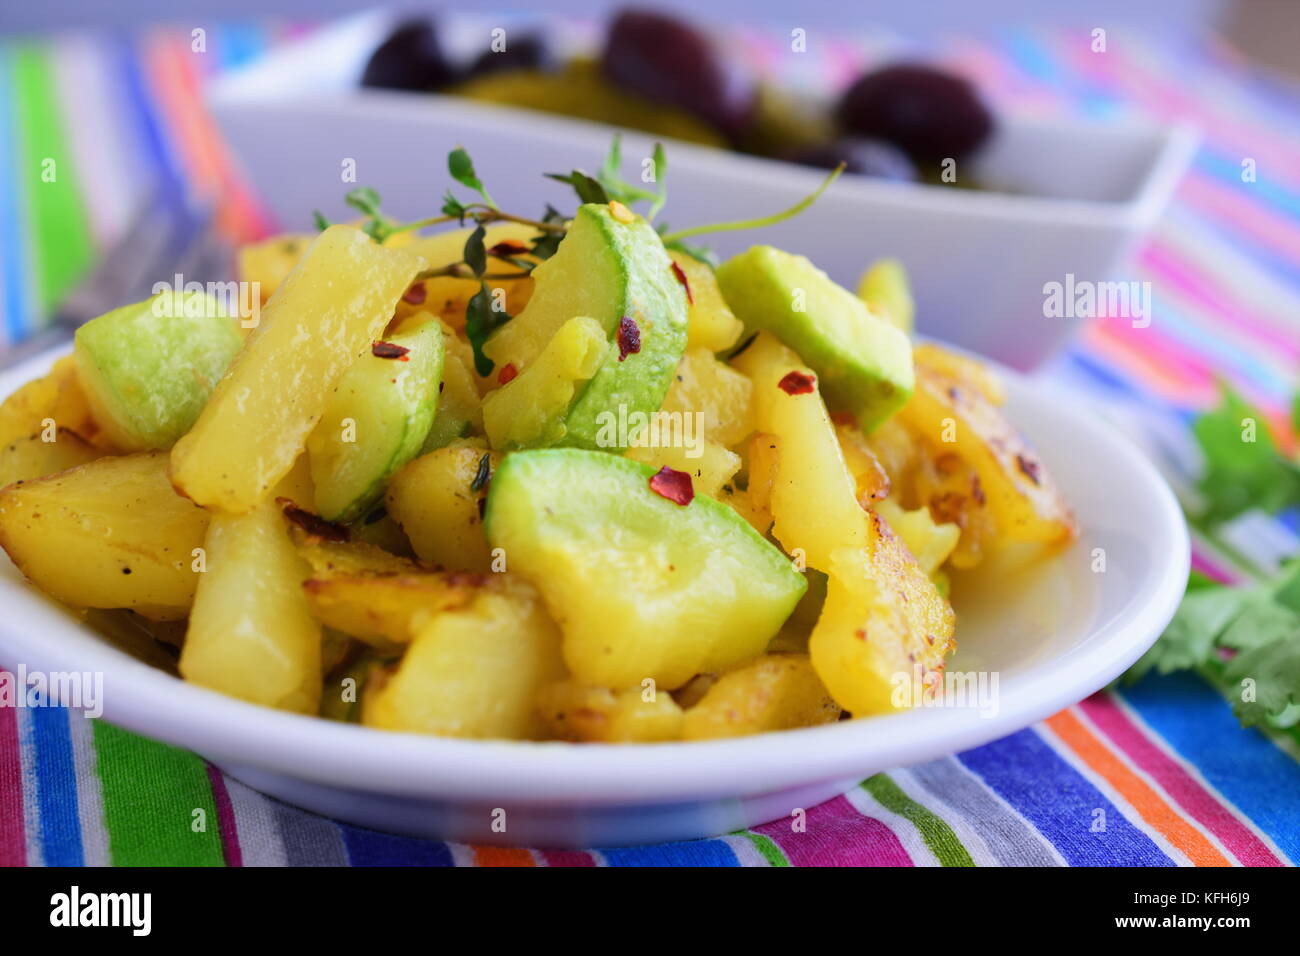 Pan fried potato with zucchini in olive oil, served with pickled vegetables. home cooking. Healthy eating concept Stock Photo